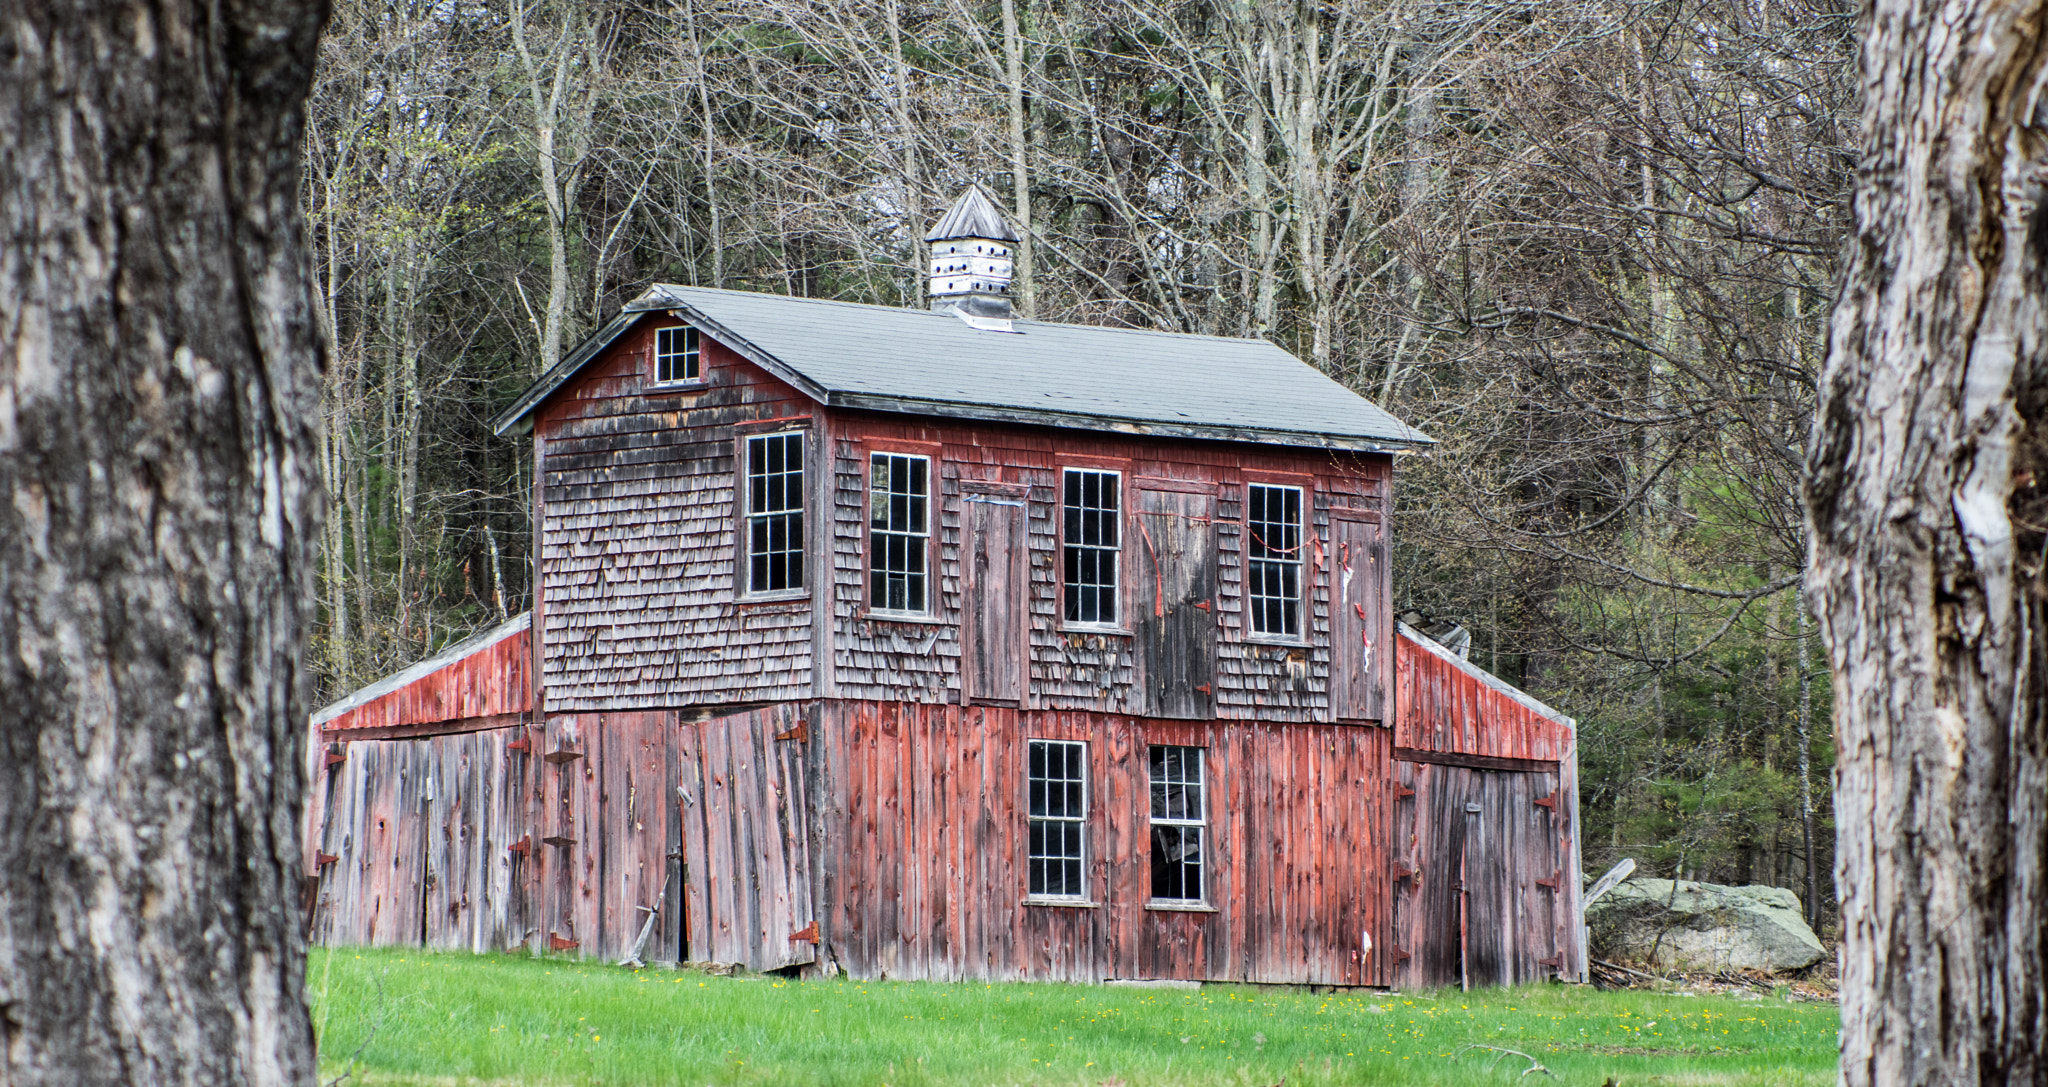 Pentax K-3 sample photo. Old red barn photography